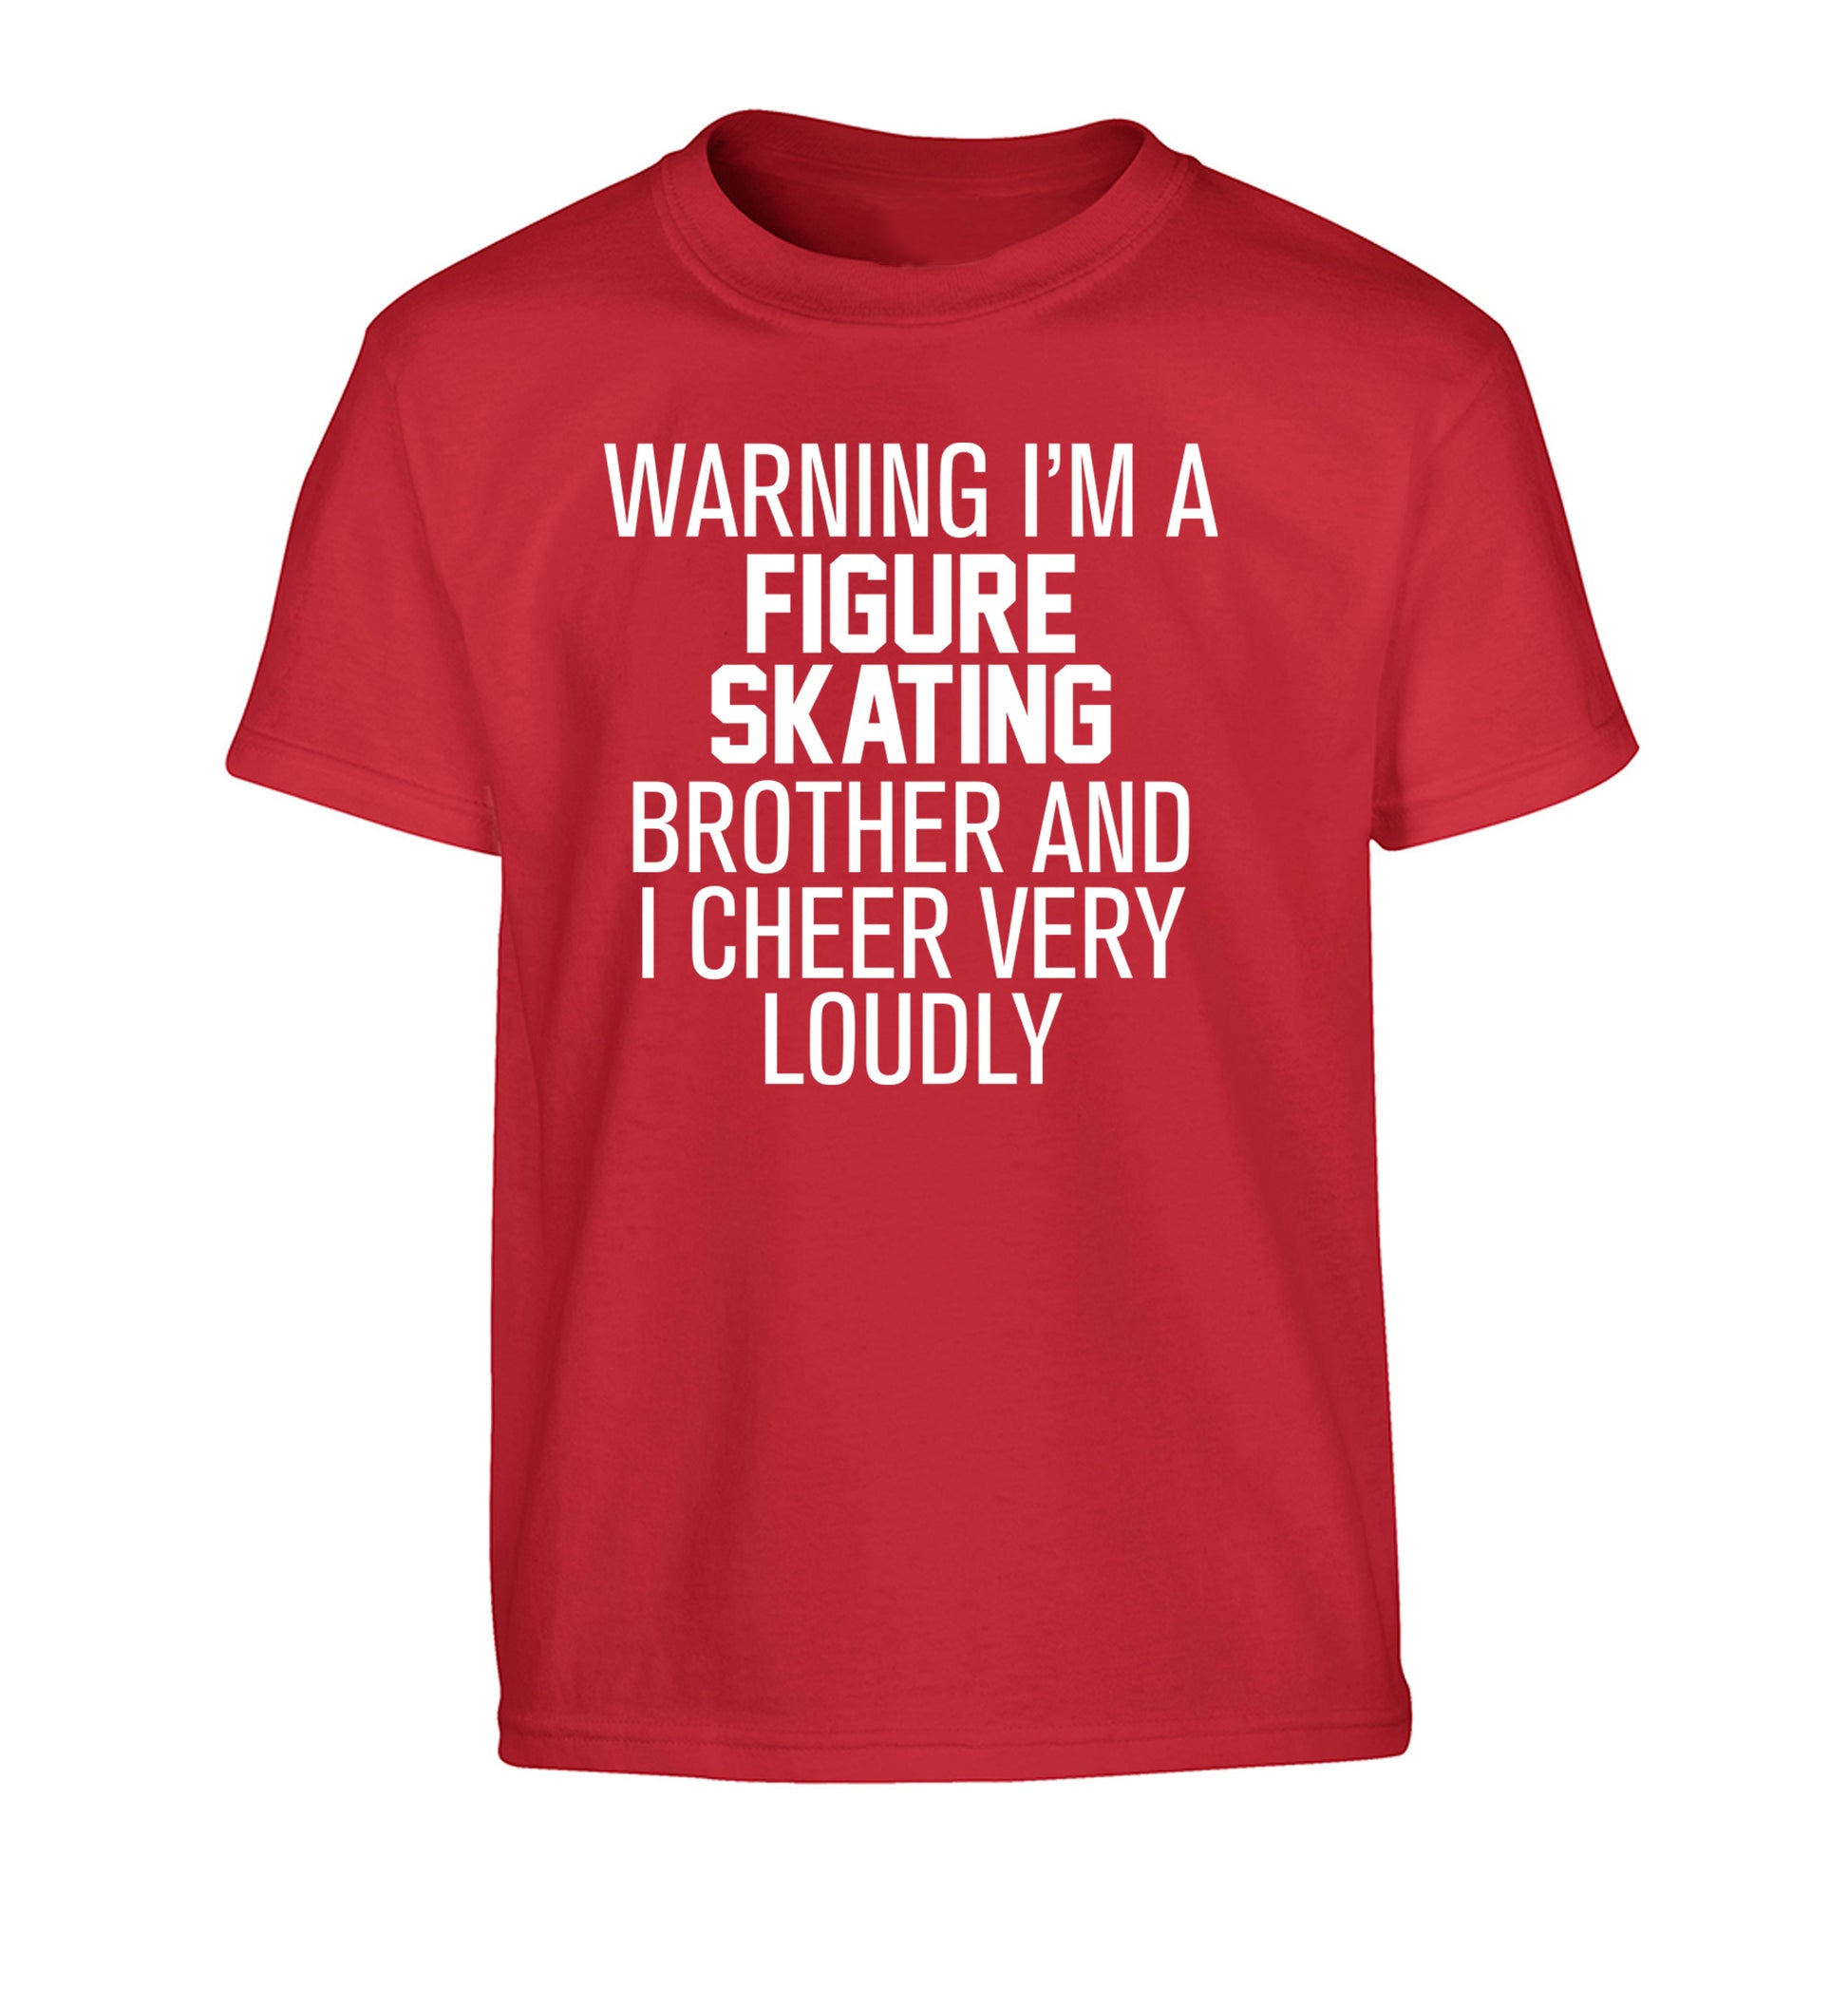 Warning I'm a figure skating brother and I cheer very loudly Children's red Tshirt 12-14 Years